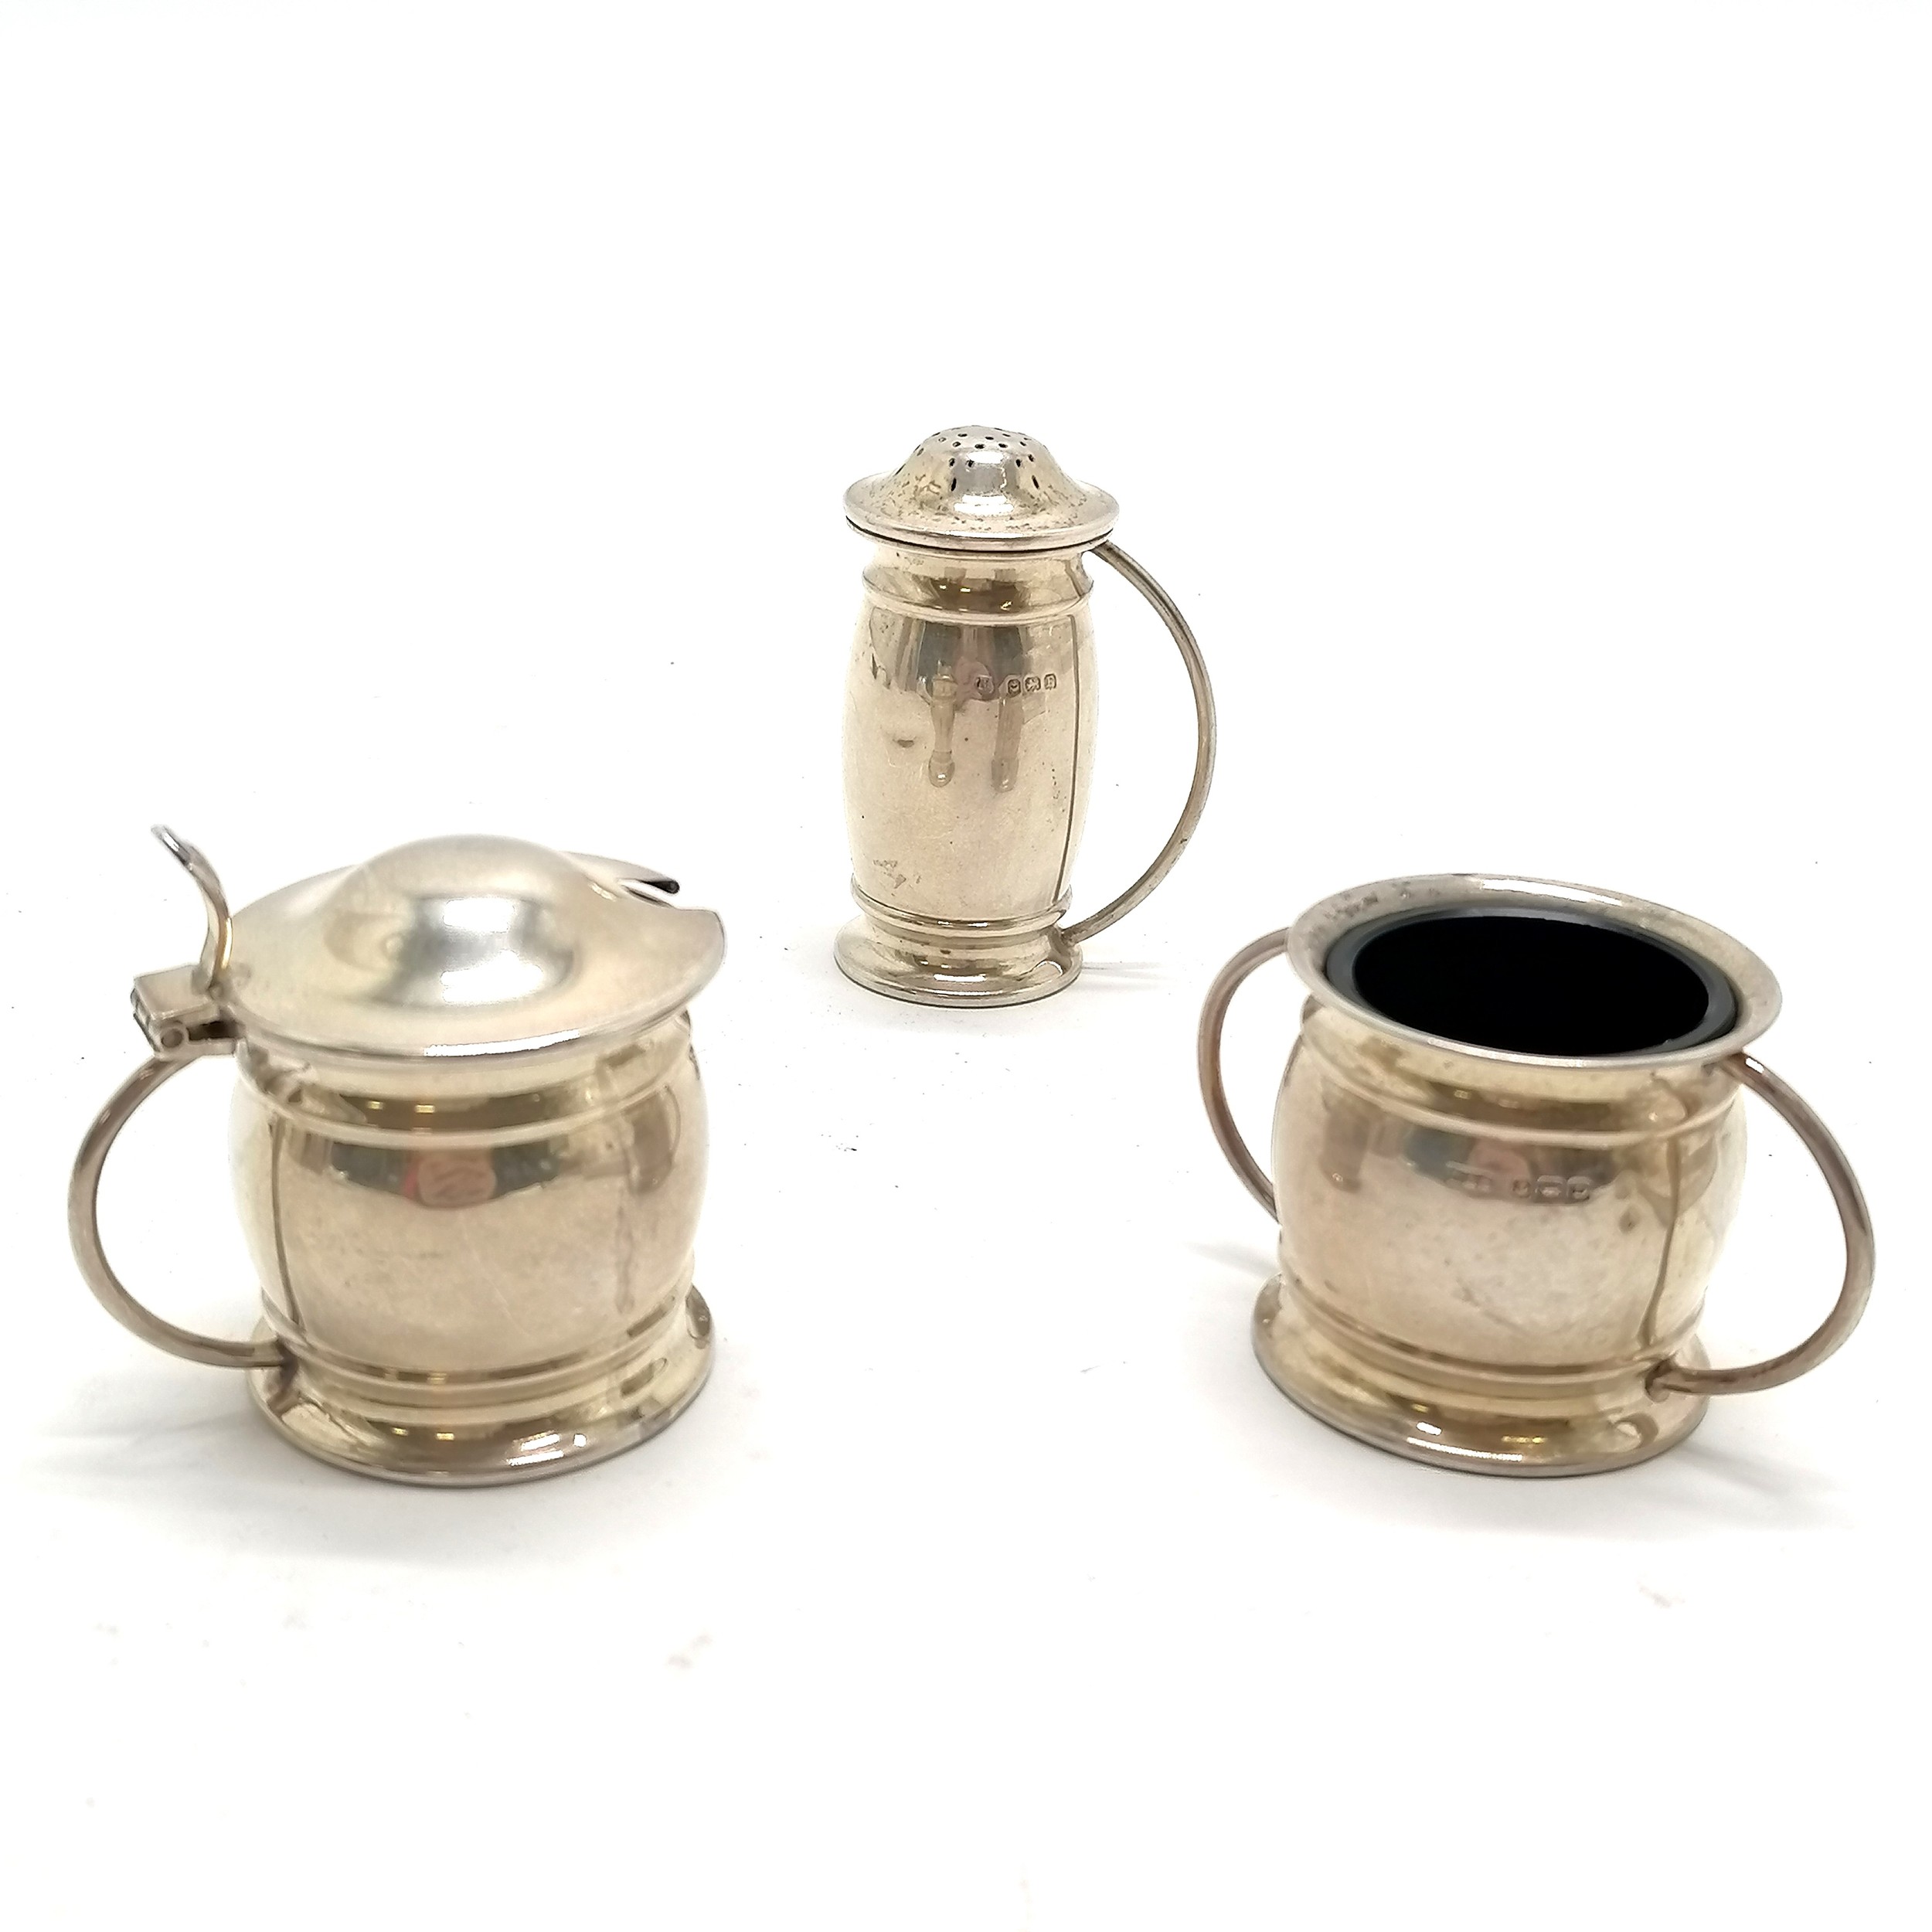 1928 sterling silver cruet set (with blue glass liners) by Levi & Salaman - pepper is 6cm high &